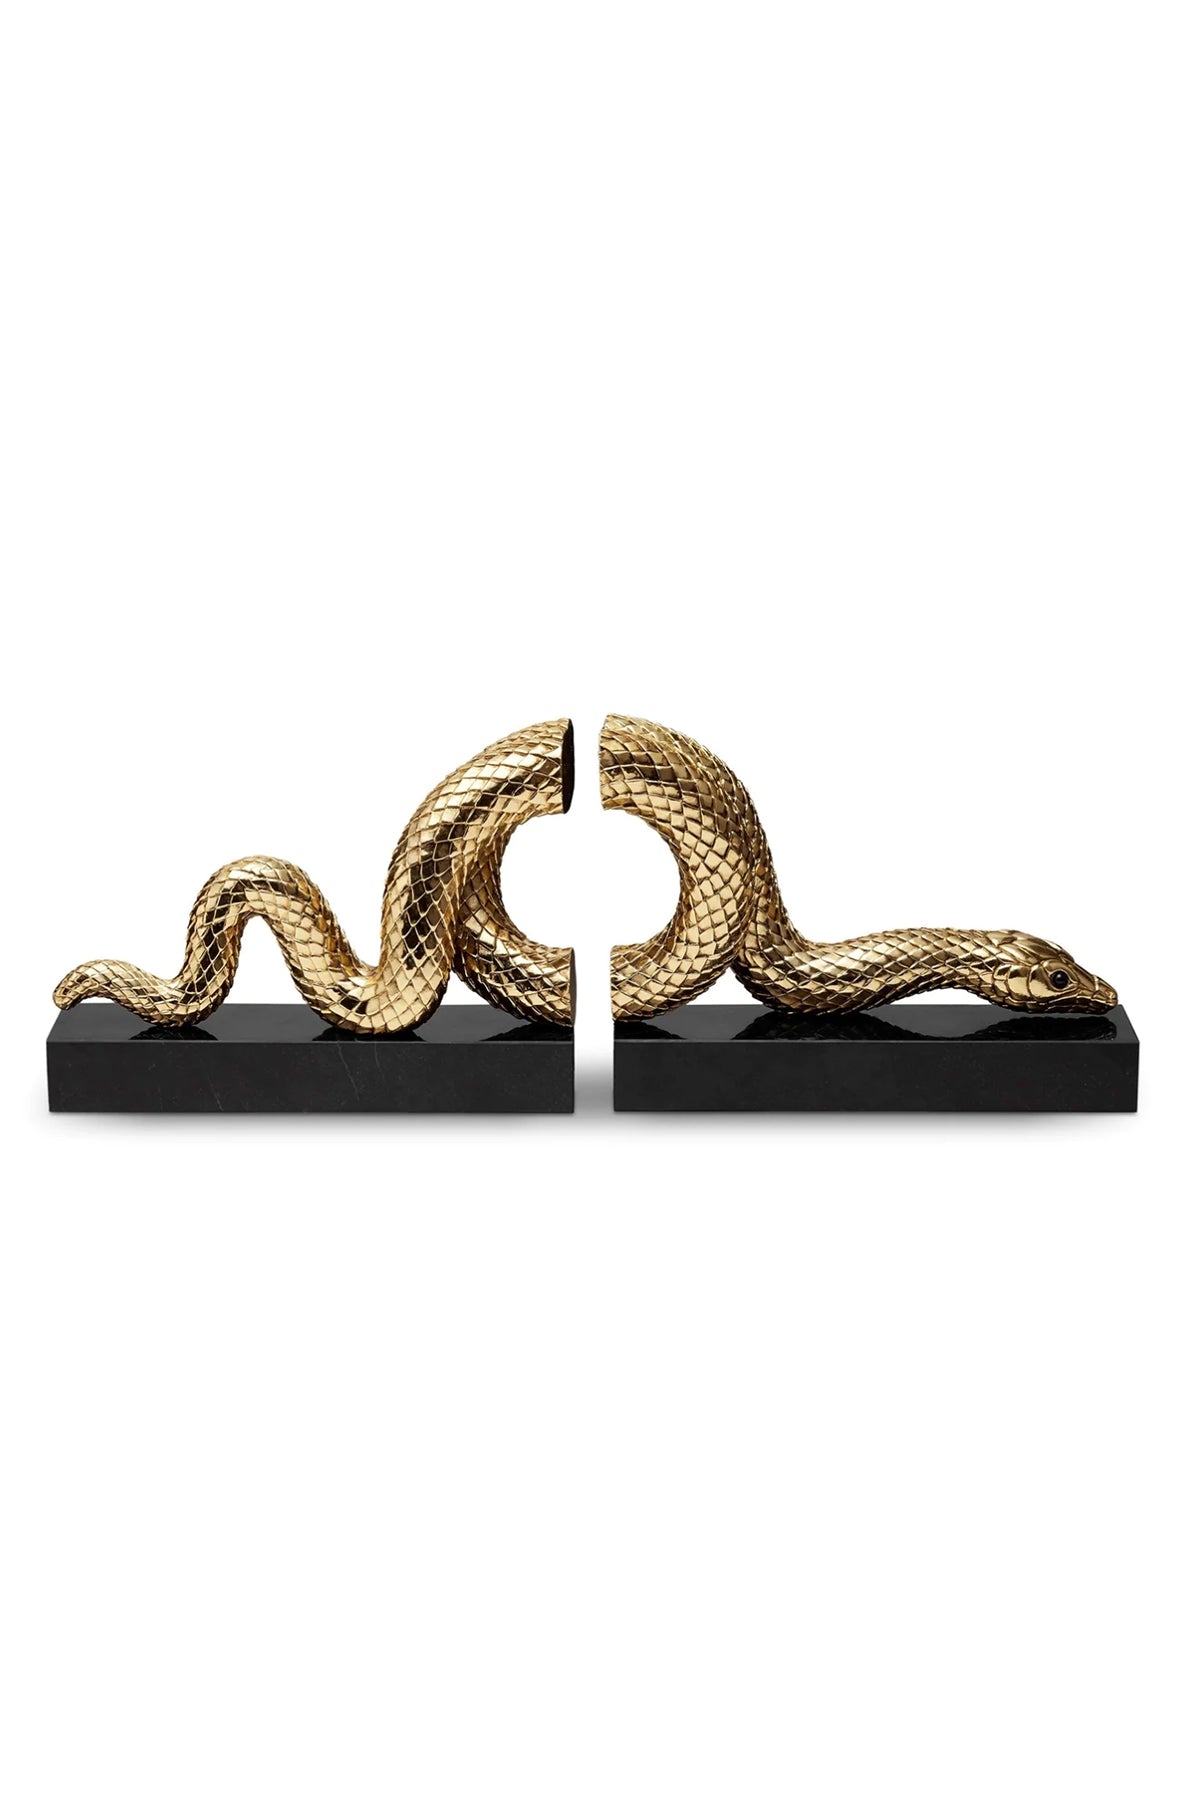 Snake Bookend